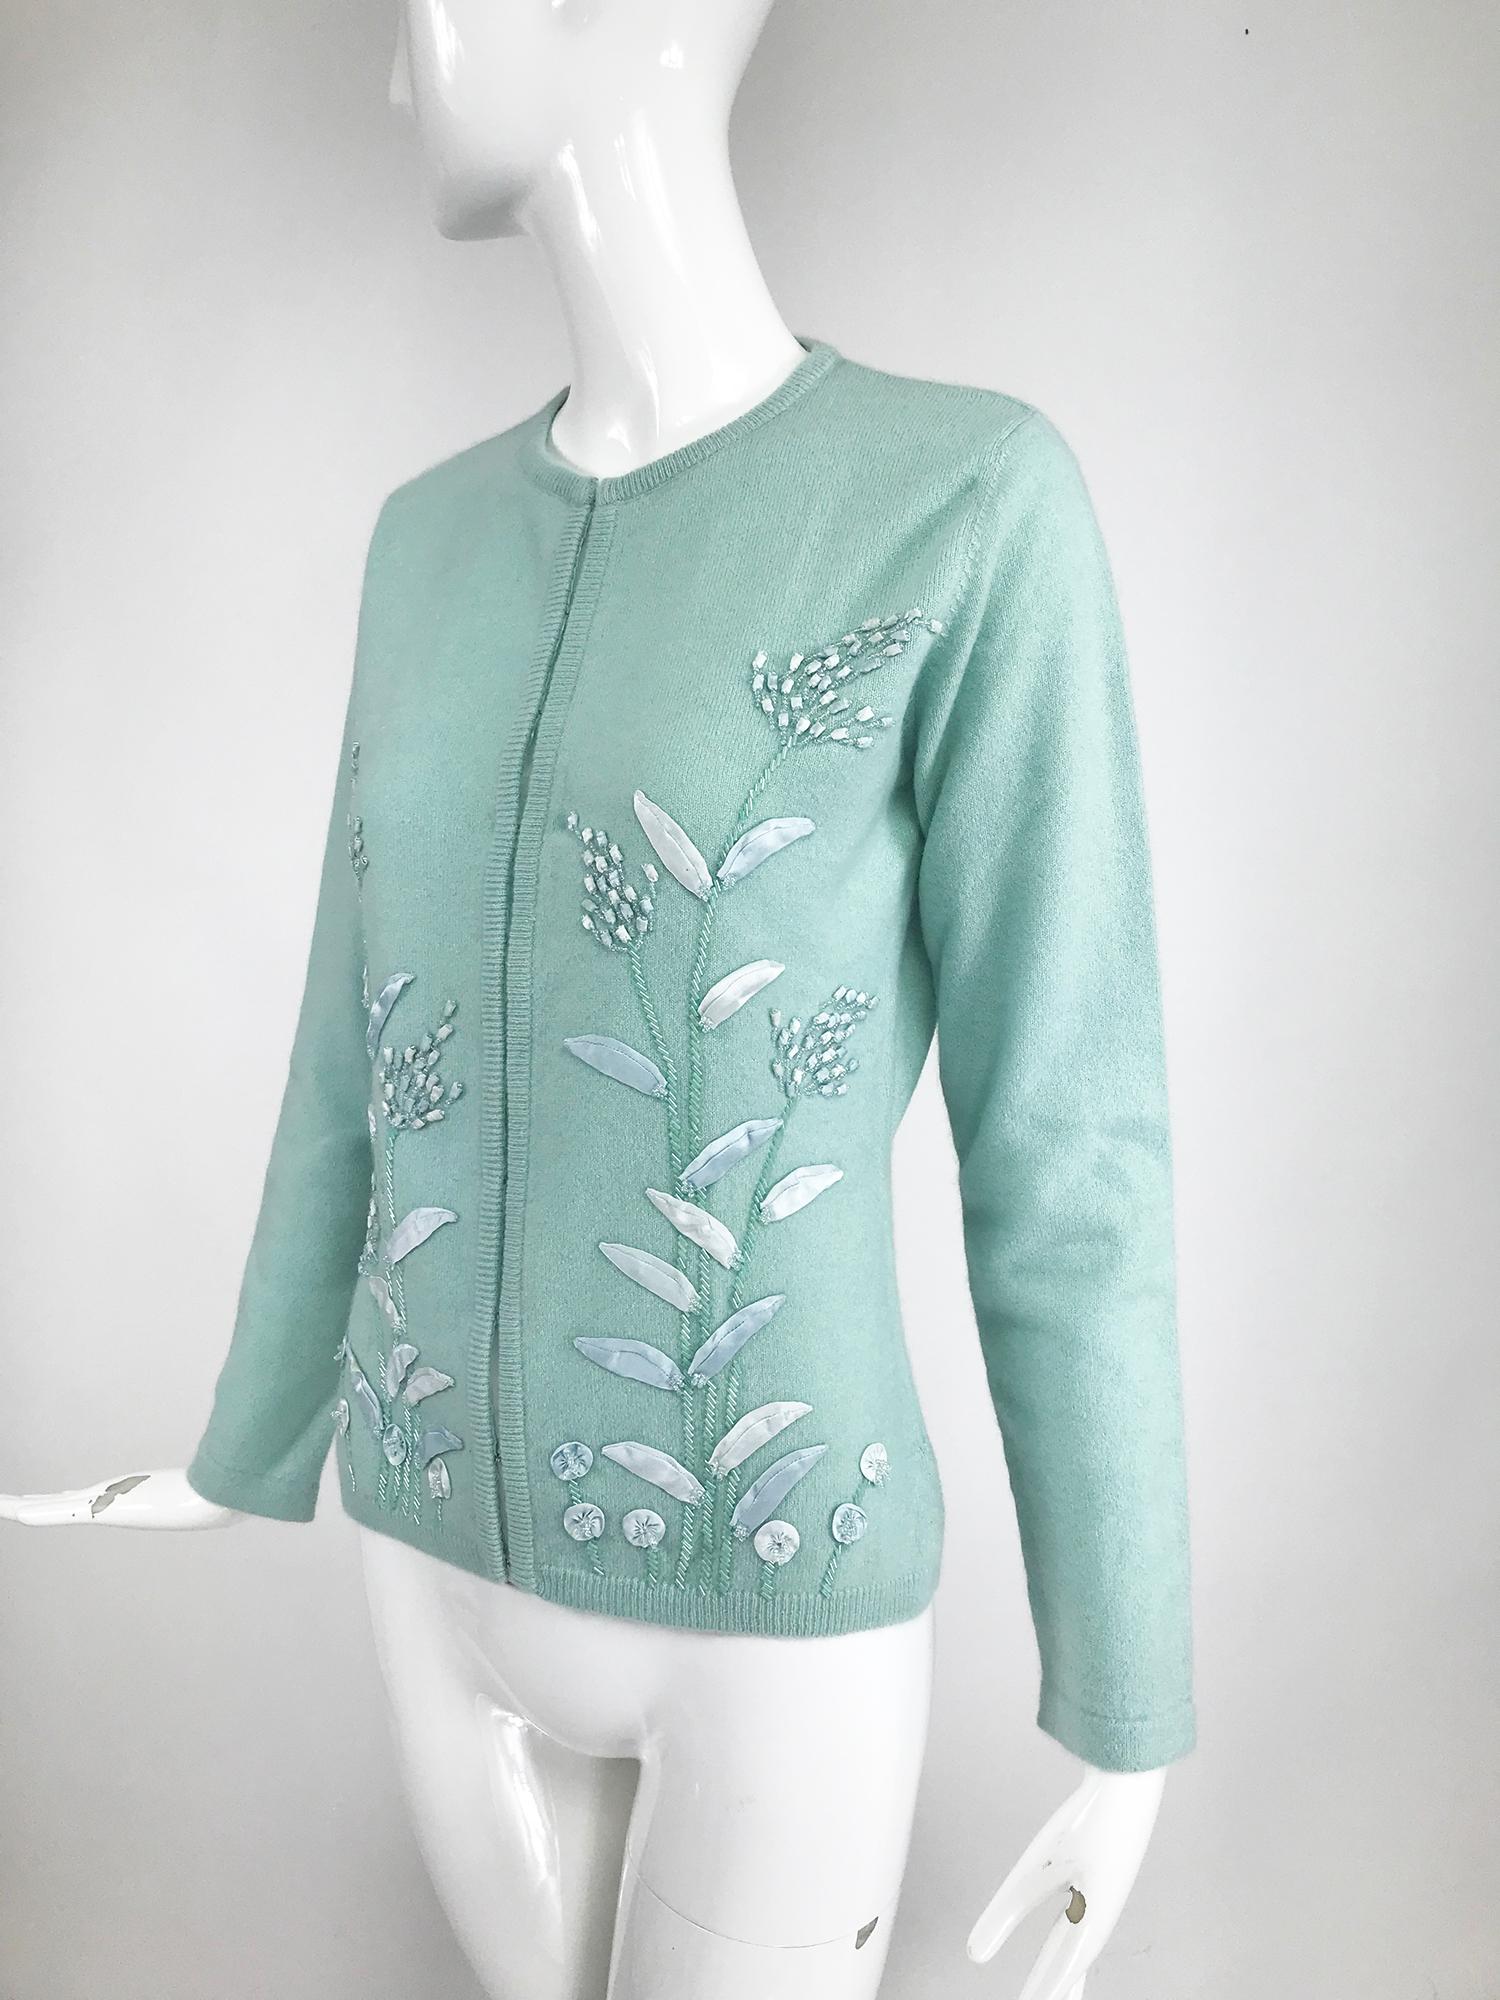 Lara Bilzerian hand appliqued robin's egg blue cashmere cardigan sweater. This beautiful sweater has beaded and satin ribbon appliqued flower motifs on each front side. The long sleeve sweater closes at the front with hidden hook and eyes. Ribbed